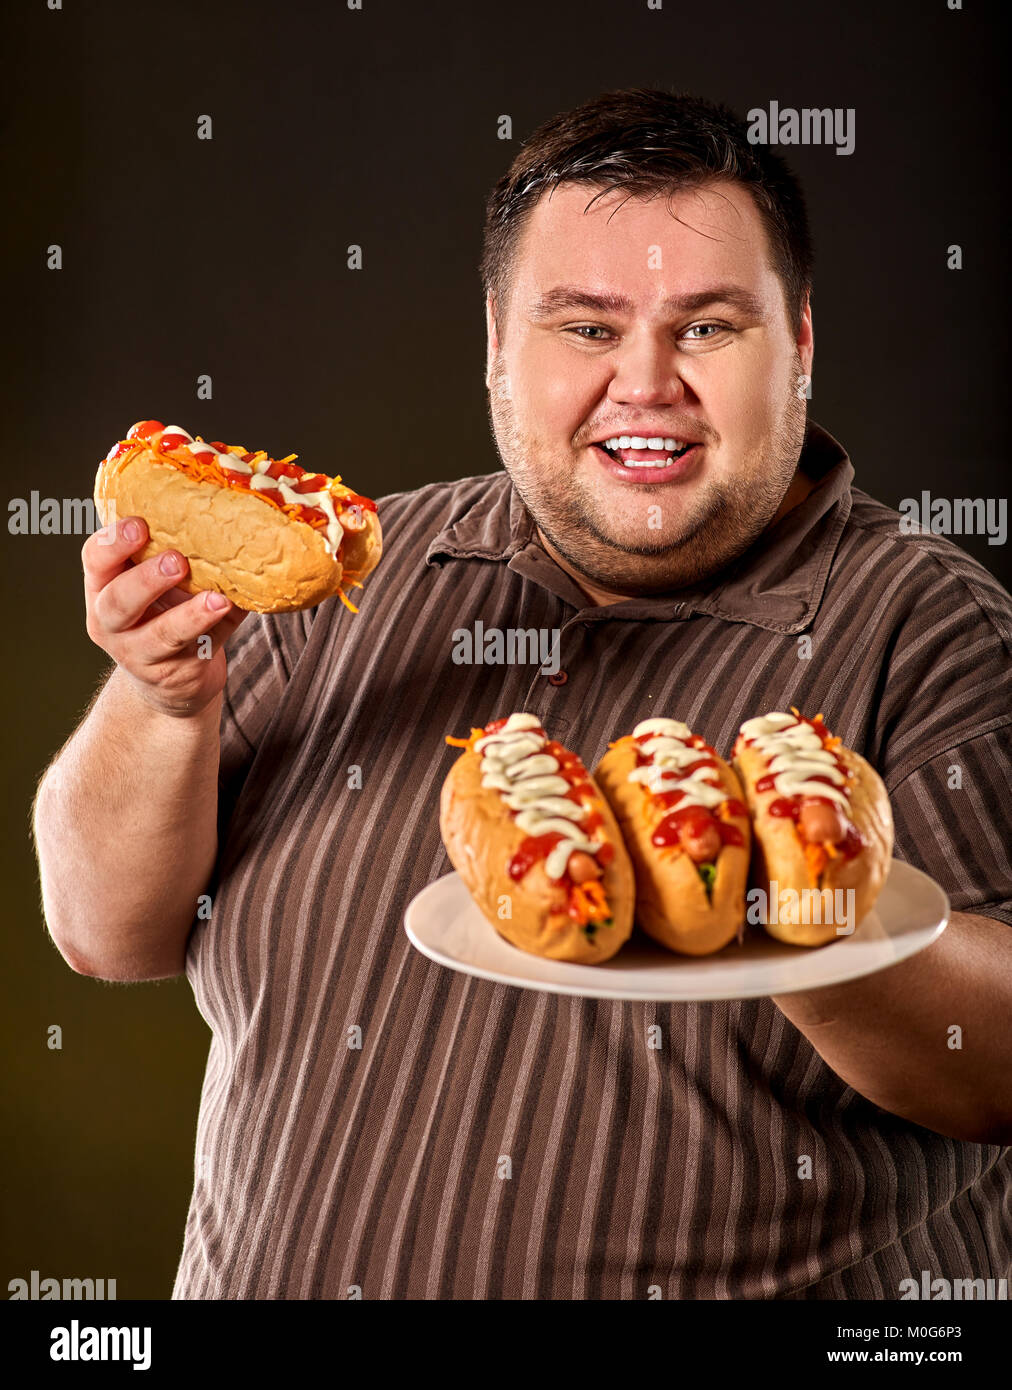 Fat man eating fast food hot dog. Breakfast for overweight person. Stock Photo